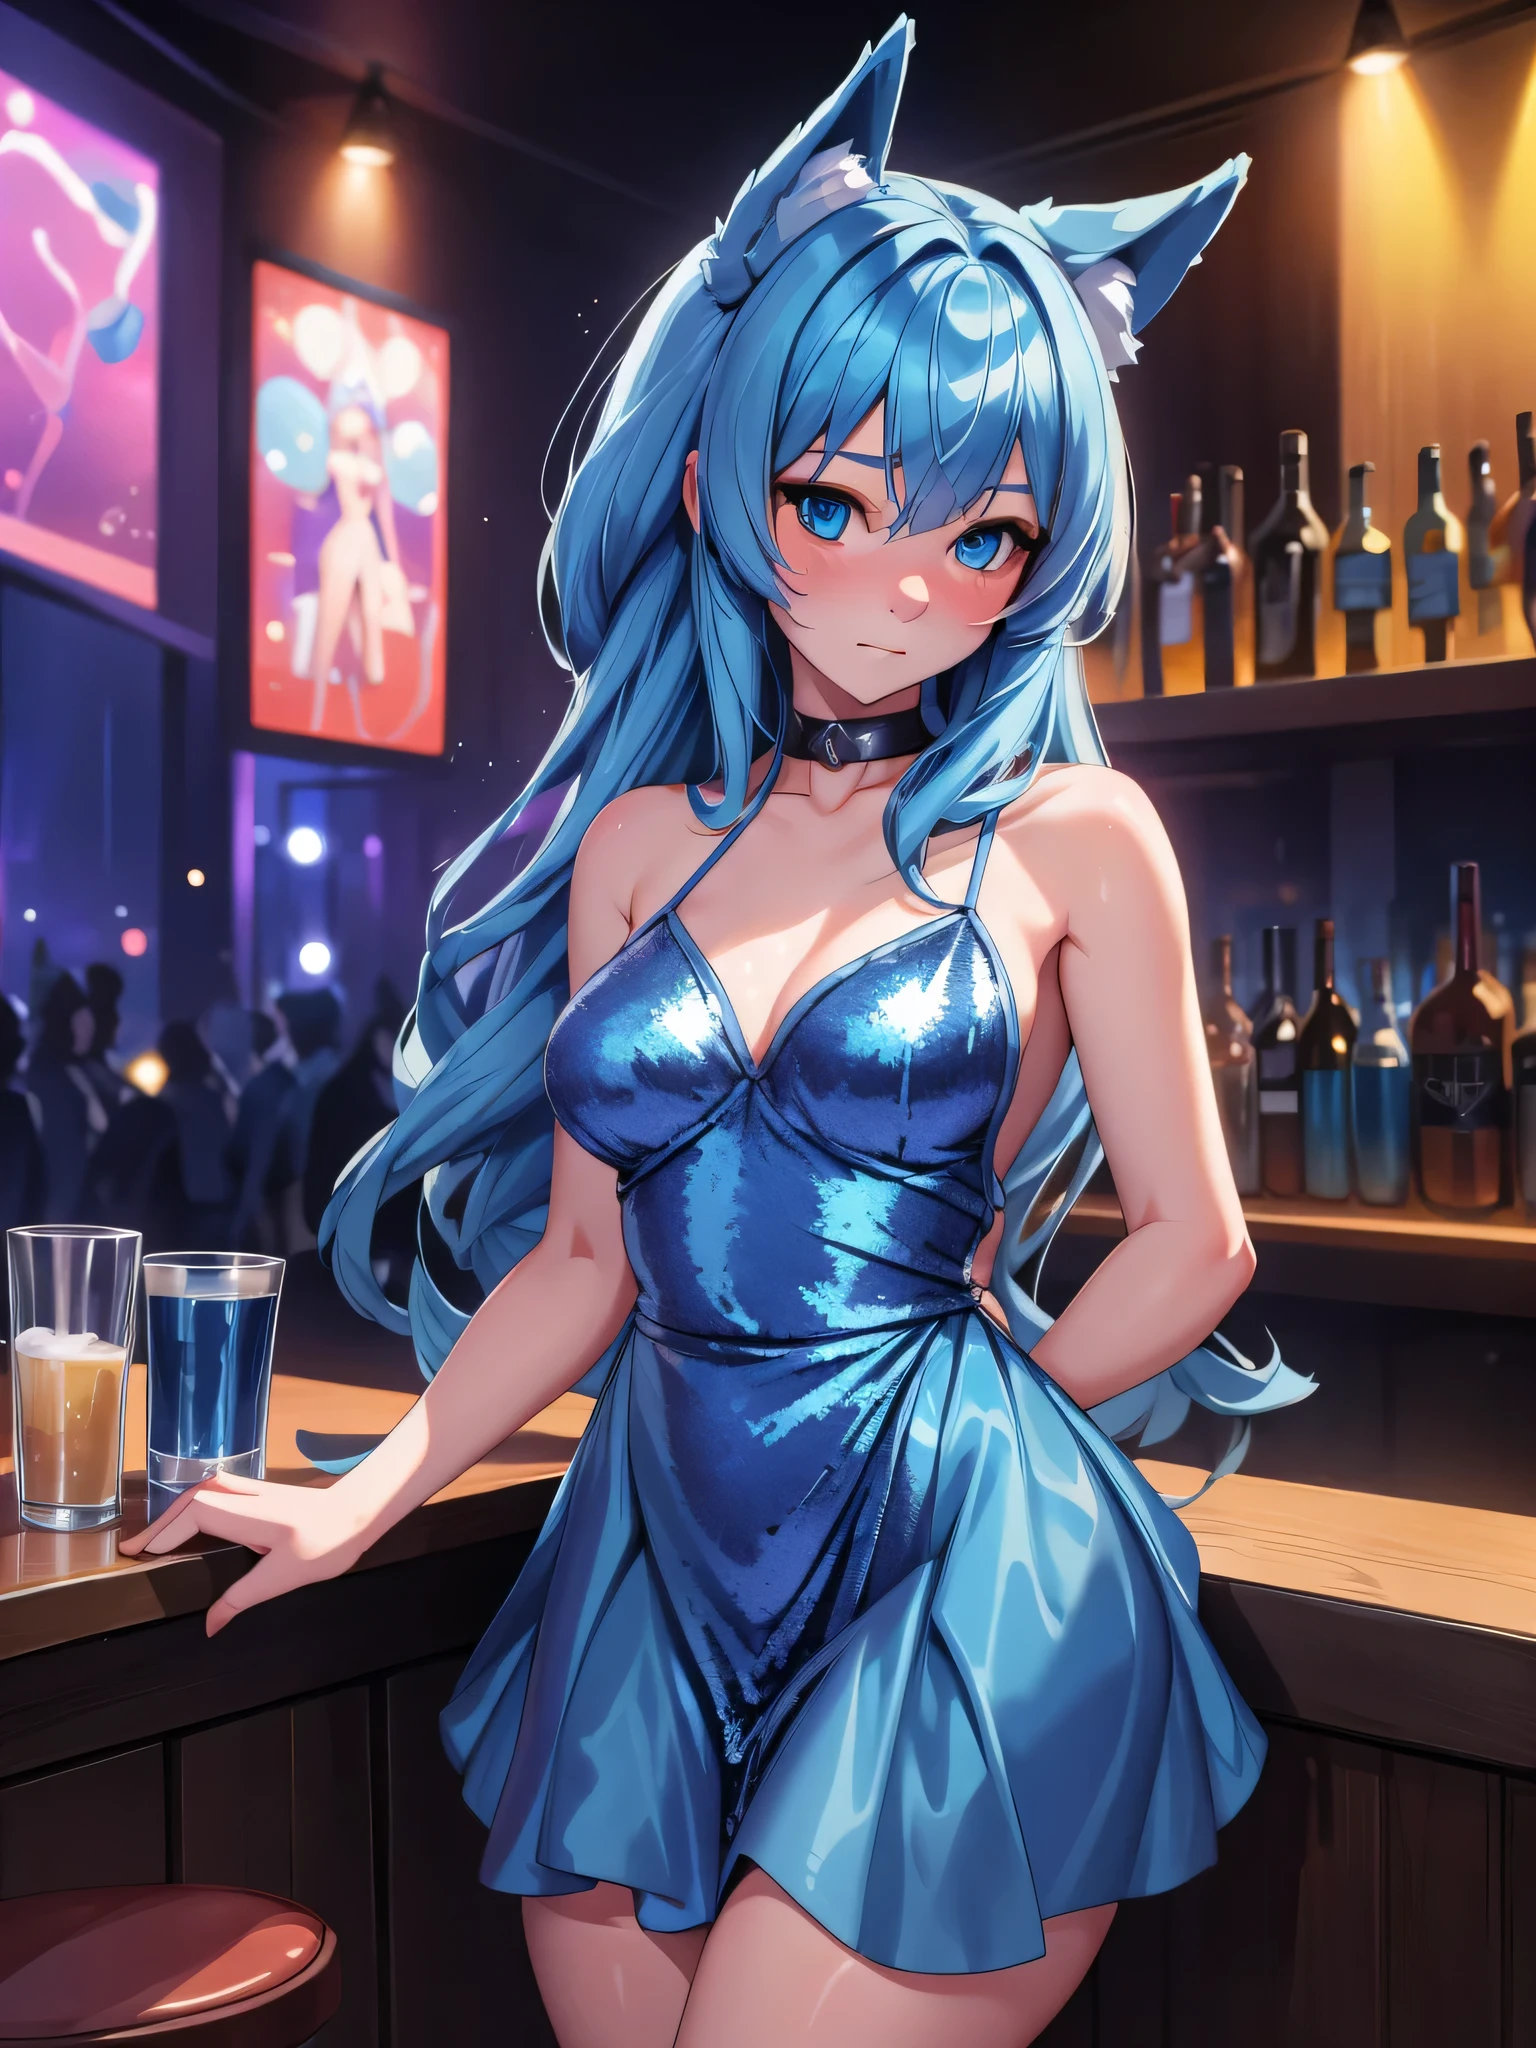 (Masterpiece) (High Detail) (High Res) A short  humanoid girl with pale human skin and blue eyes and long blue hair and blue dog ears and a big fluffy dog tail and small average breasts. British face. She is stood alone against the bar in a nightclub and is wearing a blue sequin covered dress. She looks shy.